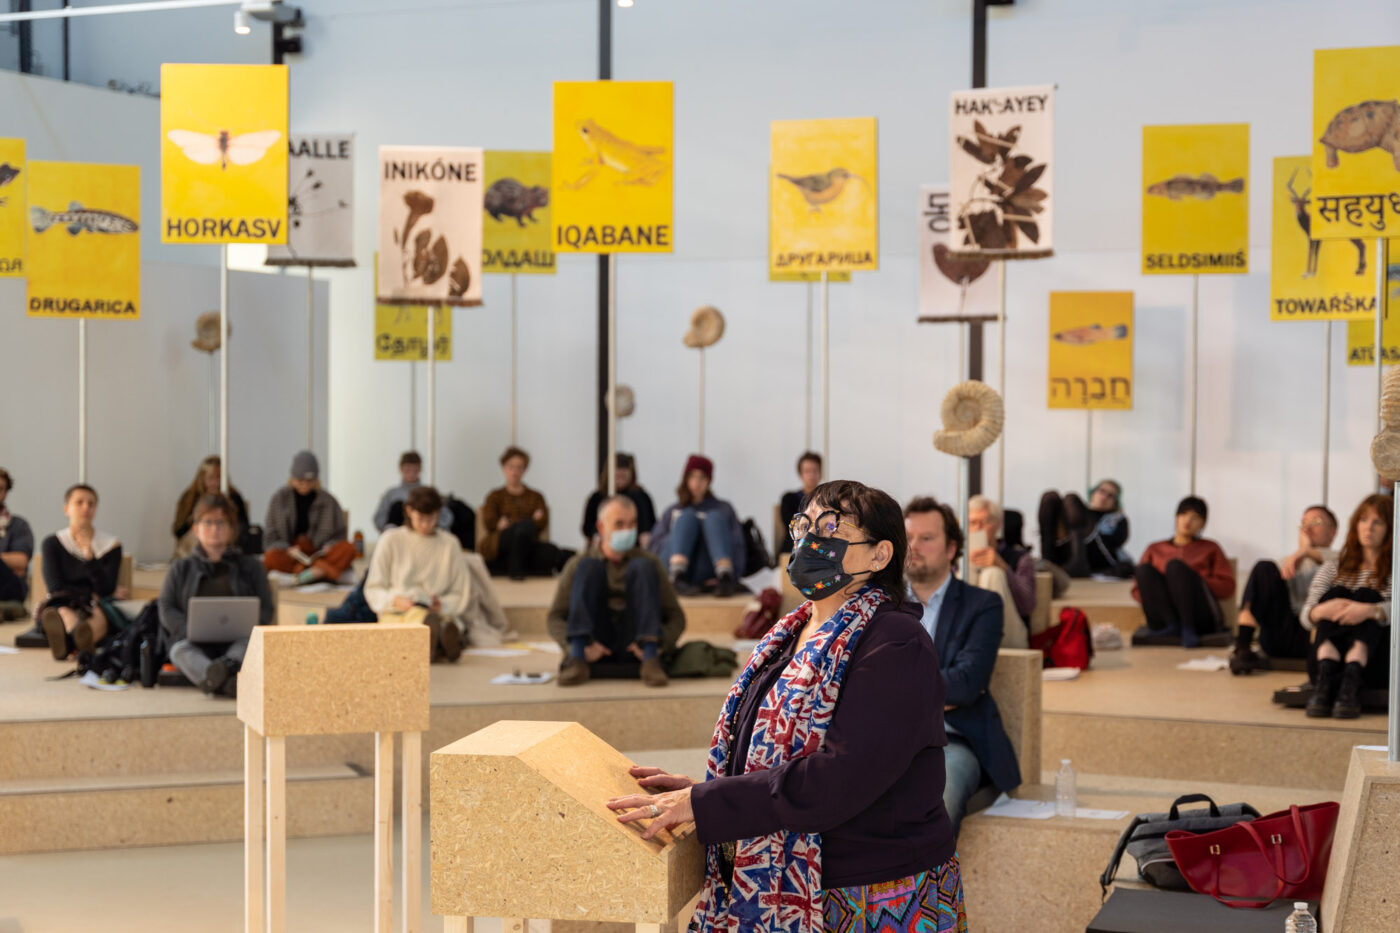 Sharon Venne - Hearings of the Court for Intergenerational Climate Crimes (2021-2022). Photo: Ruben Hamelink